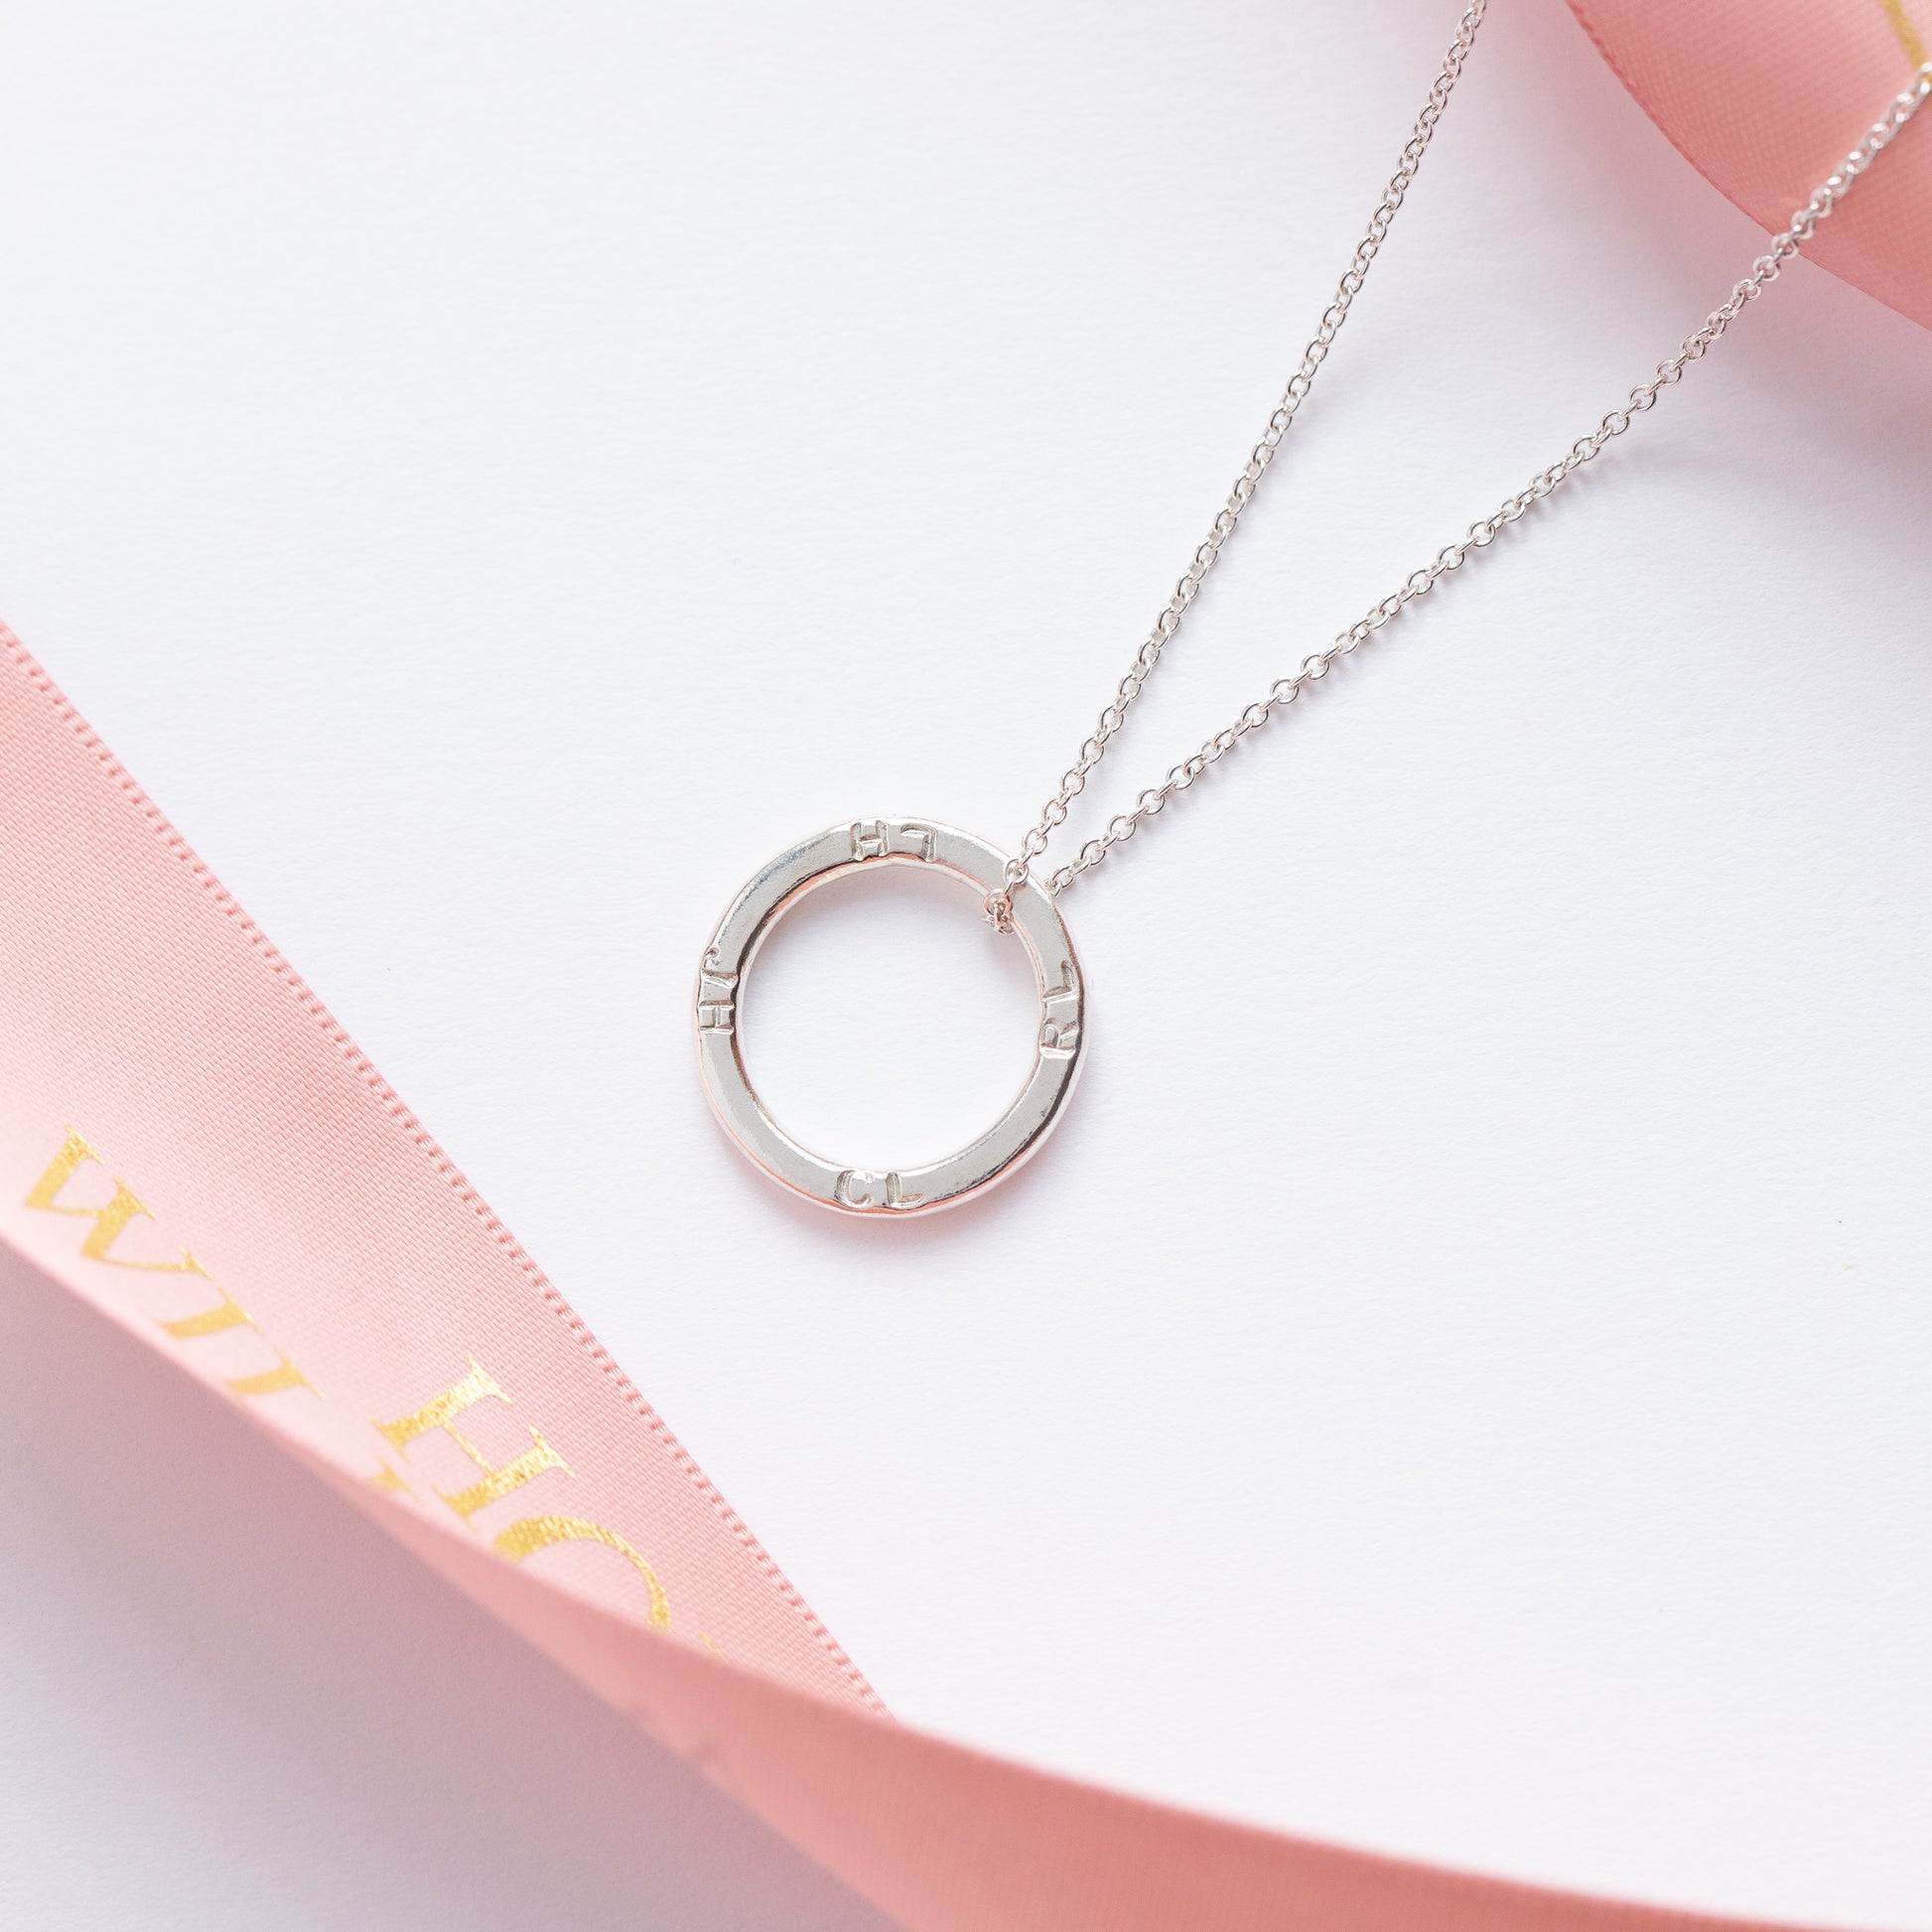 Gift for Bride from Hen Party - Personalised Circle of Hens Necklace - Silver